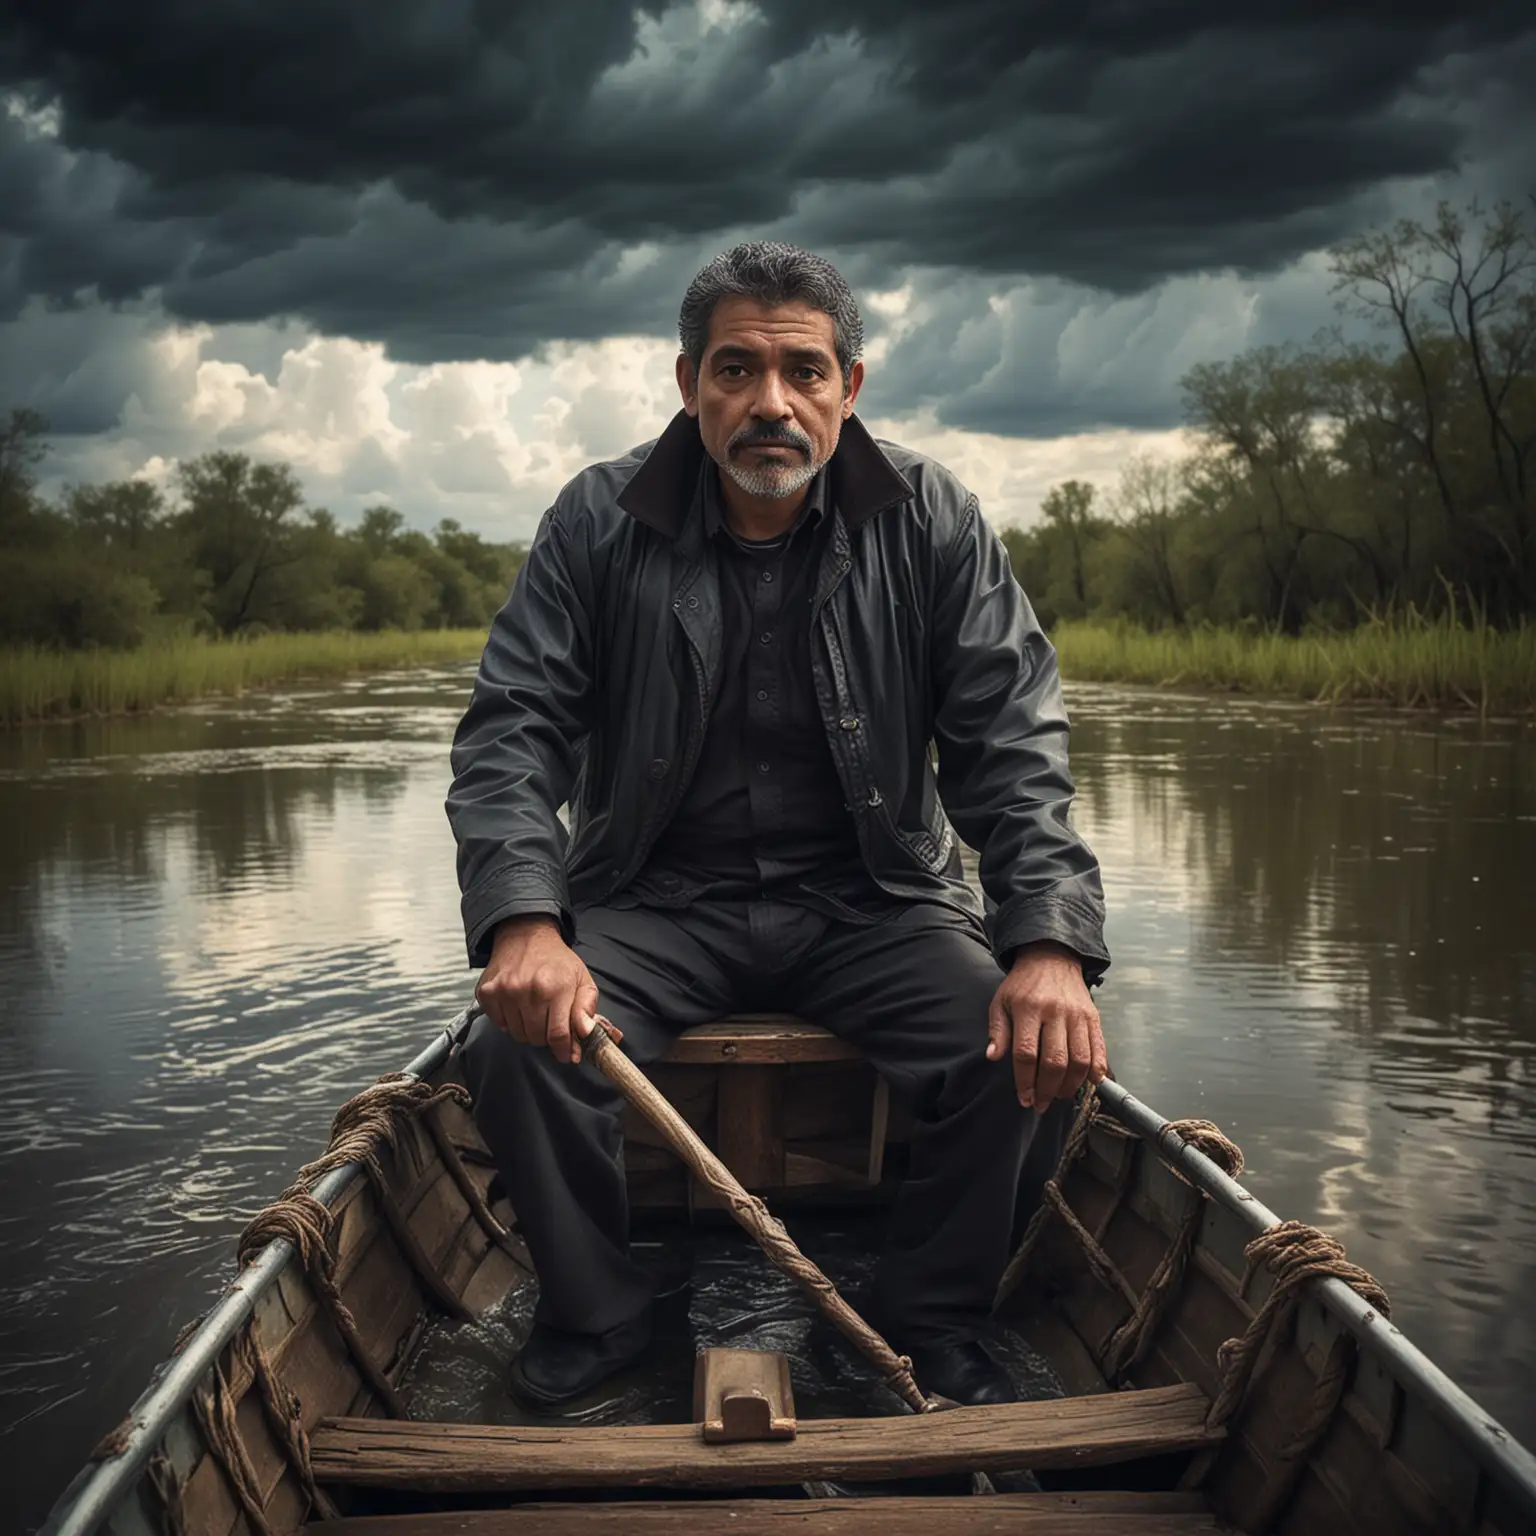 Hispanic Man with Metal Cane Boating on River in Dramatic Lighting